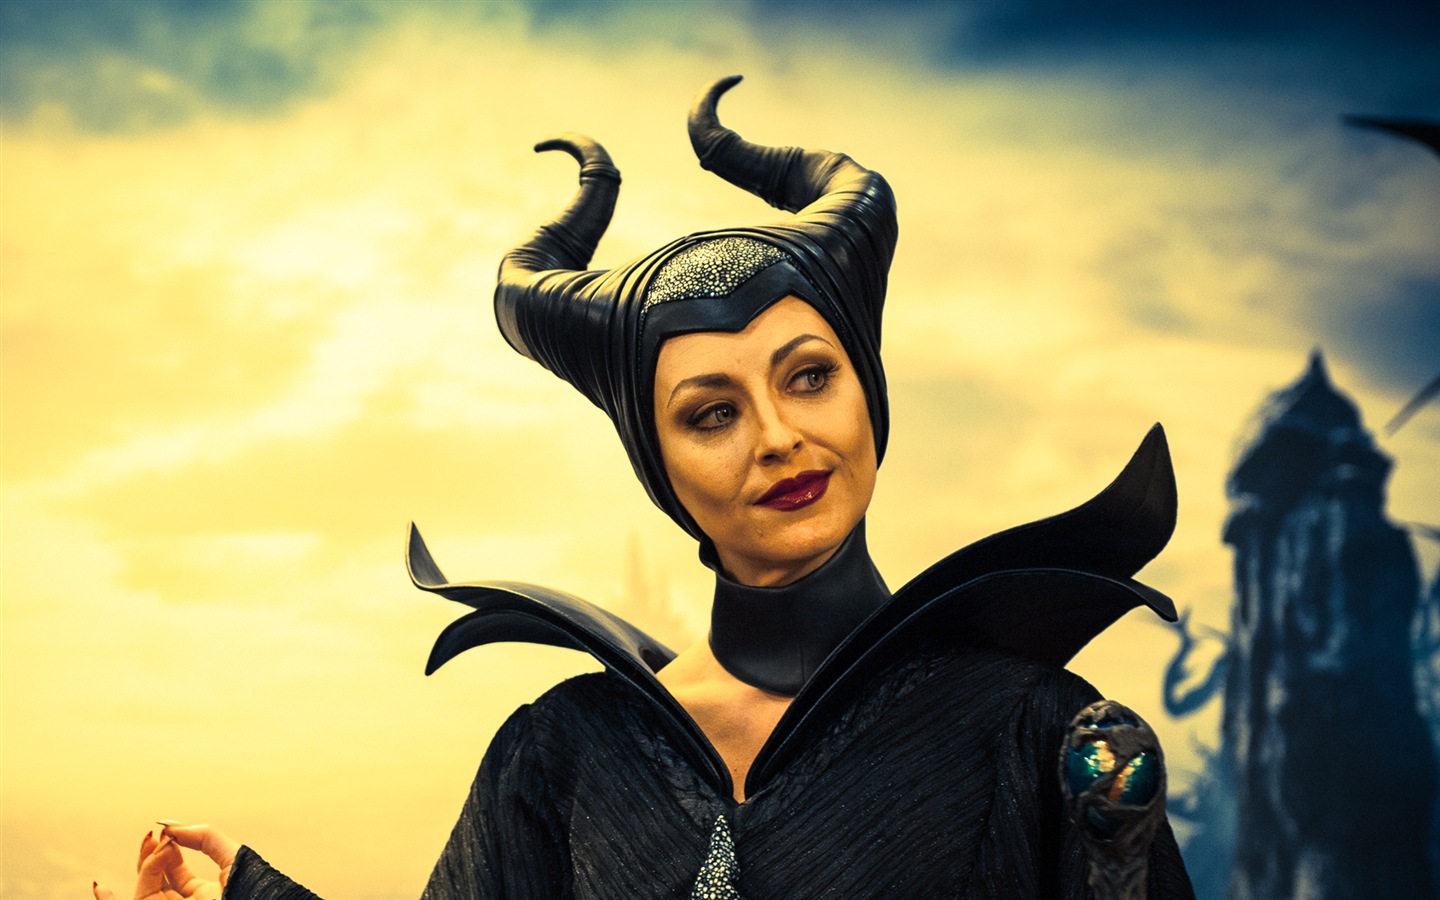 Maleficent 2014 HD movie wallpapers #15 - 1440x900